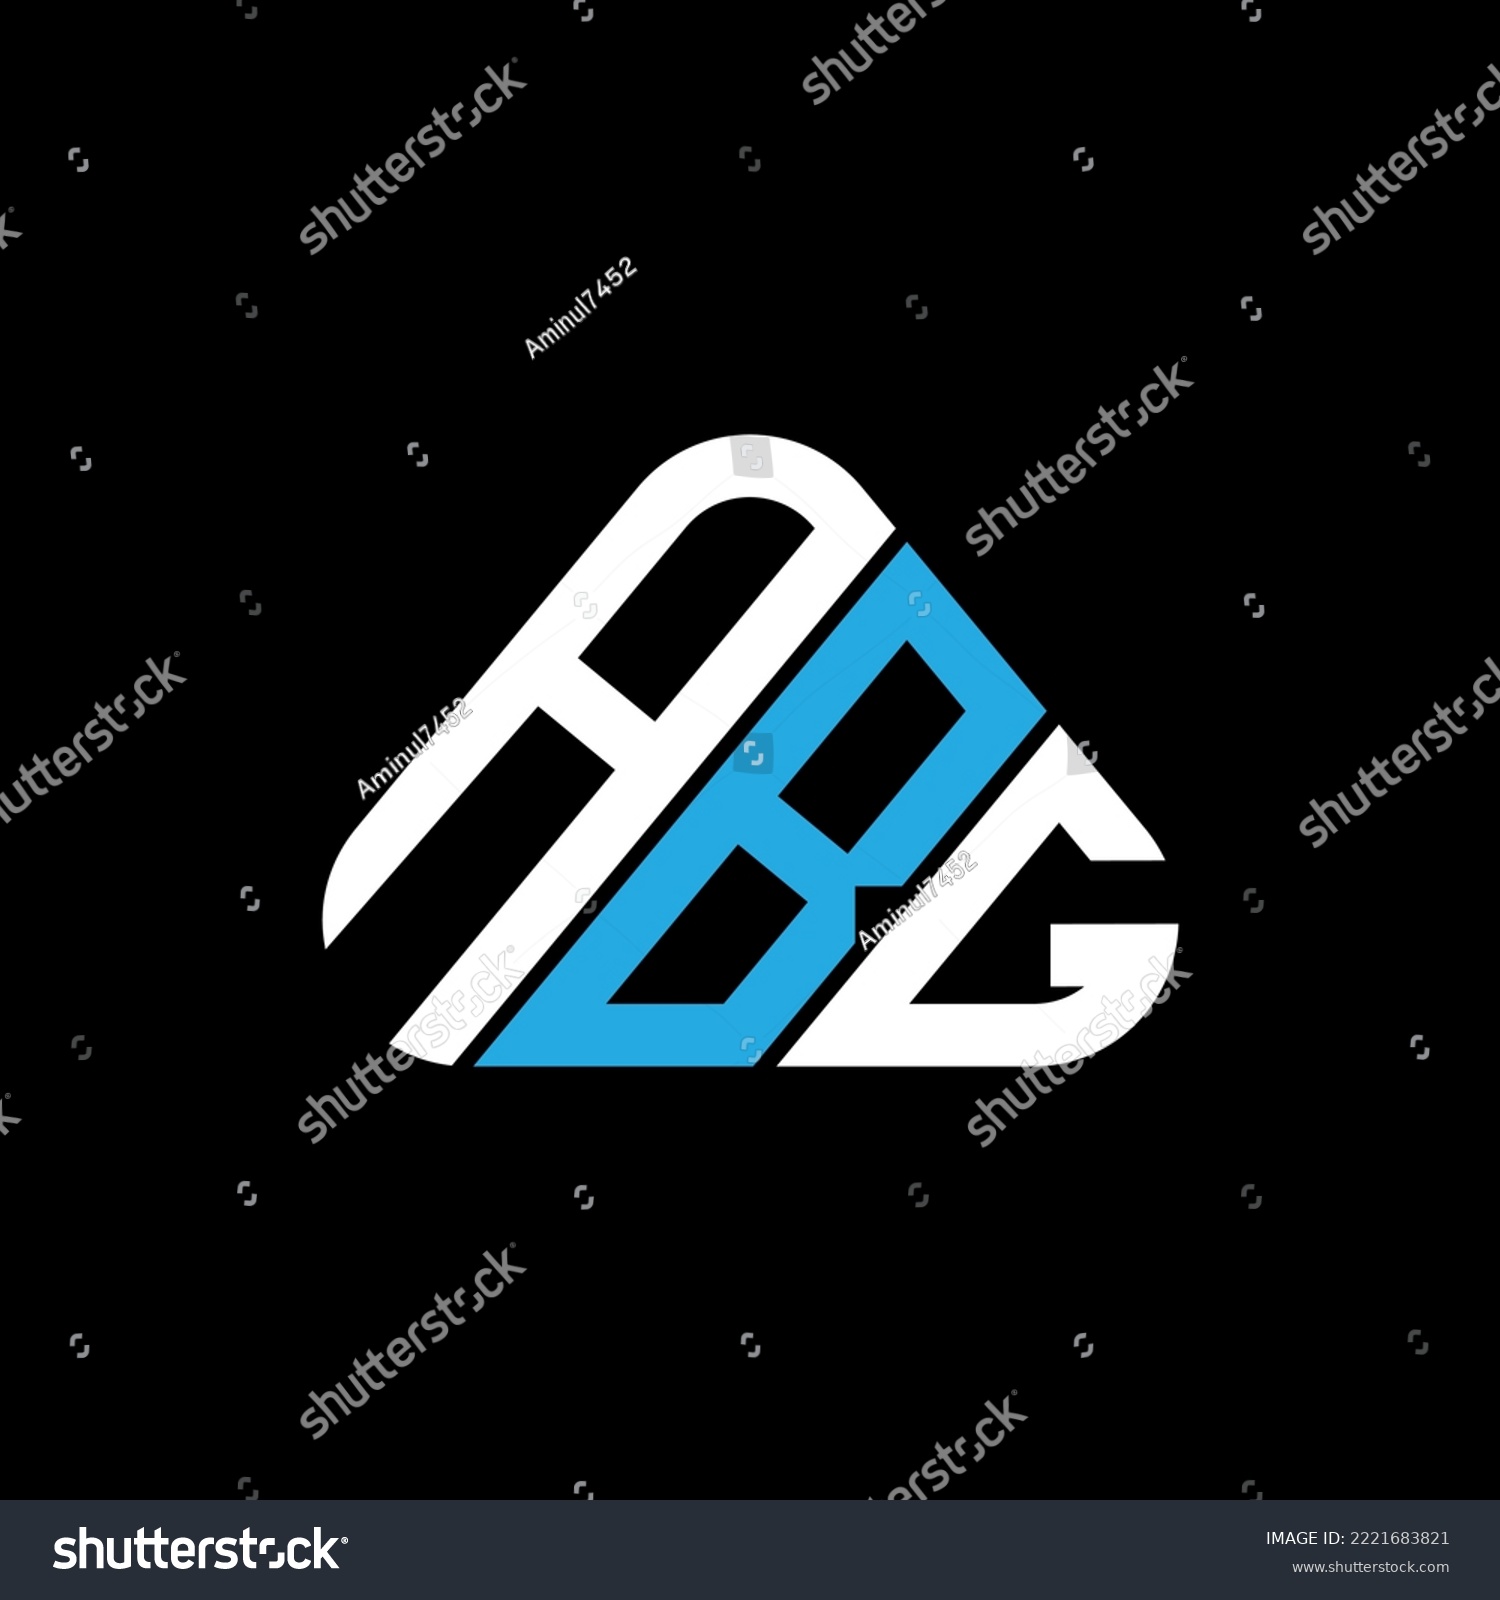 SVG of ABG letter logo creative design with vector graphic, ABG simple and modern logo in triangle shape. svg